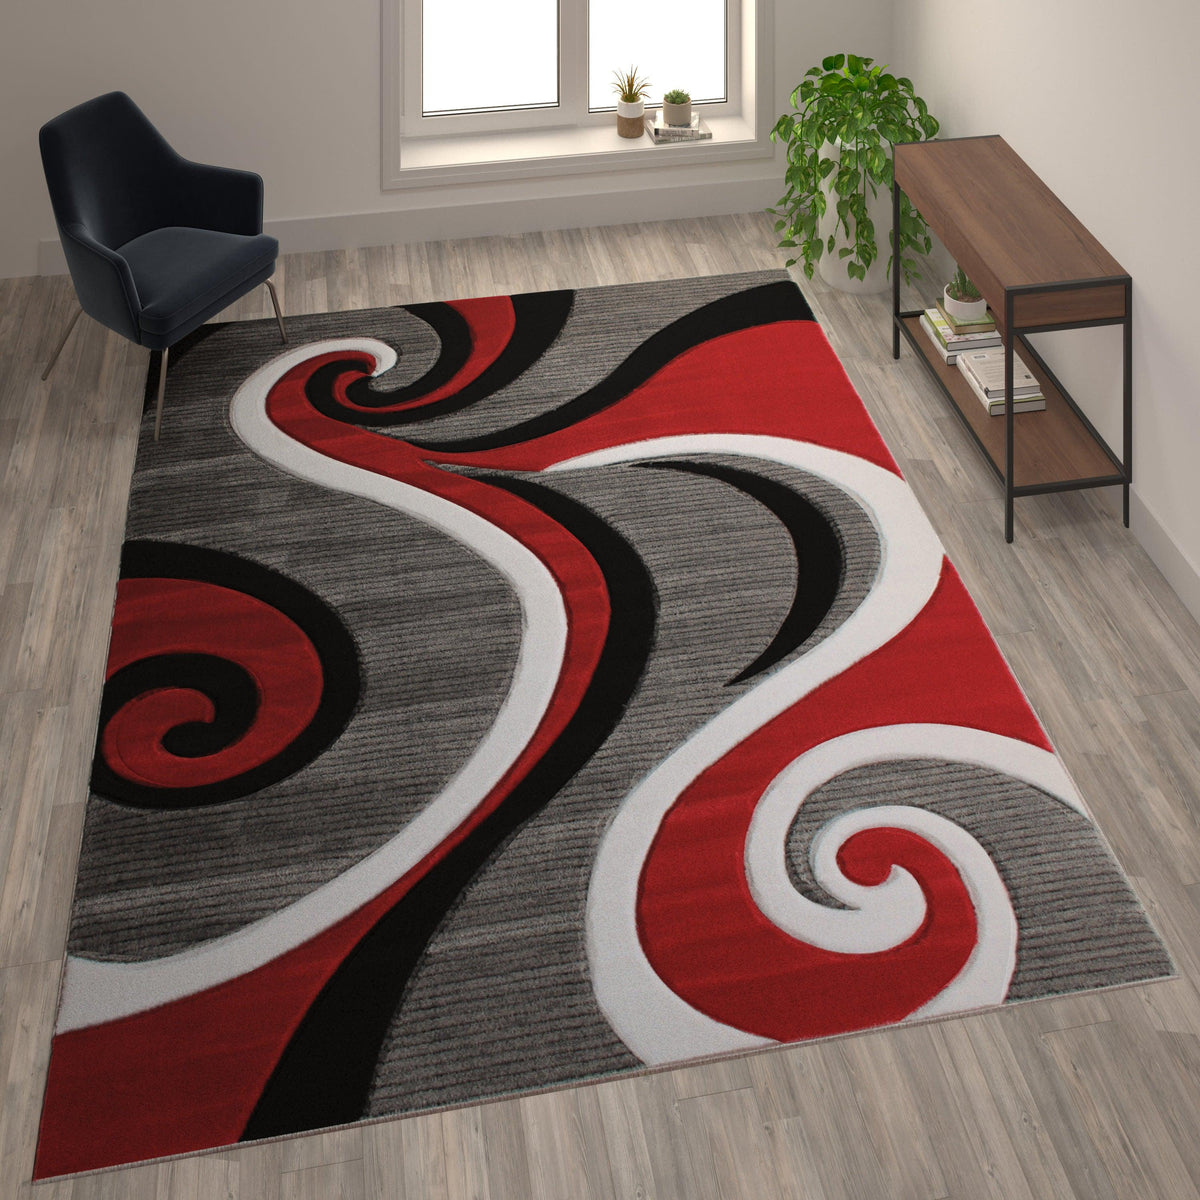 Red,8' x 10' |#| Modern High-Low Sculpted Swirl Design Abstract Area Rug - Red - 8' x 10'